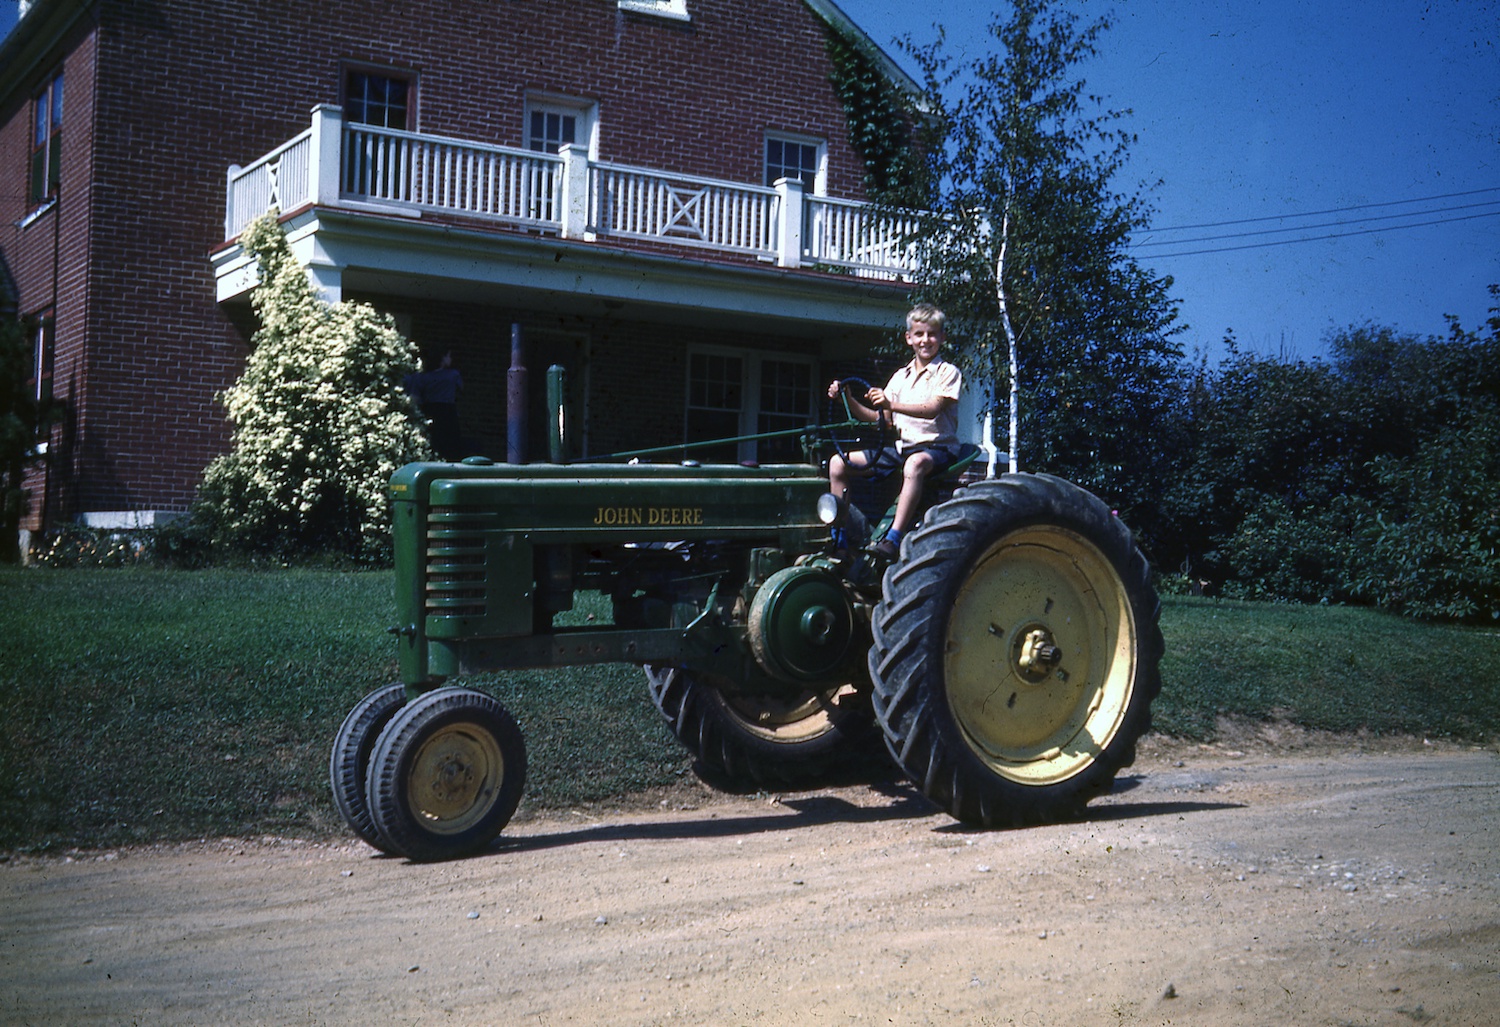 A kid drive a John Deere tractor in front of his brick house in 1946.